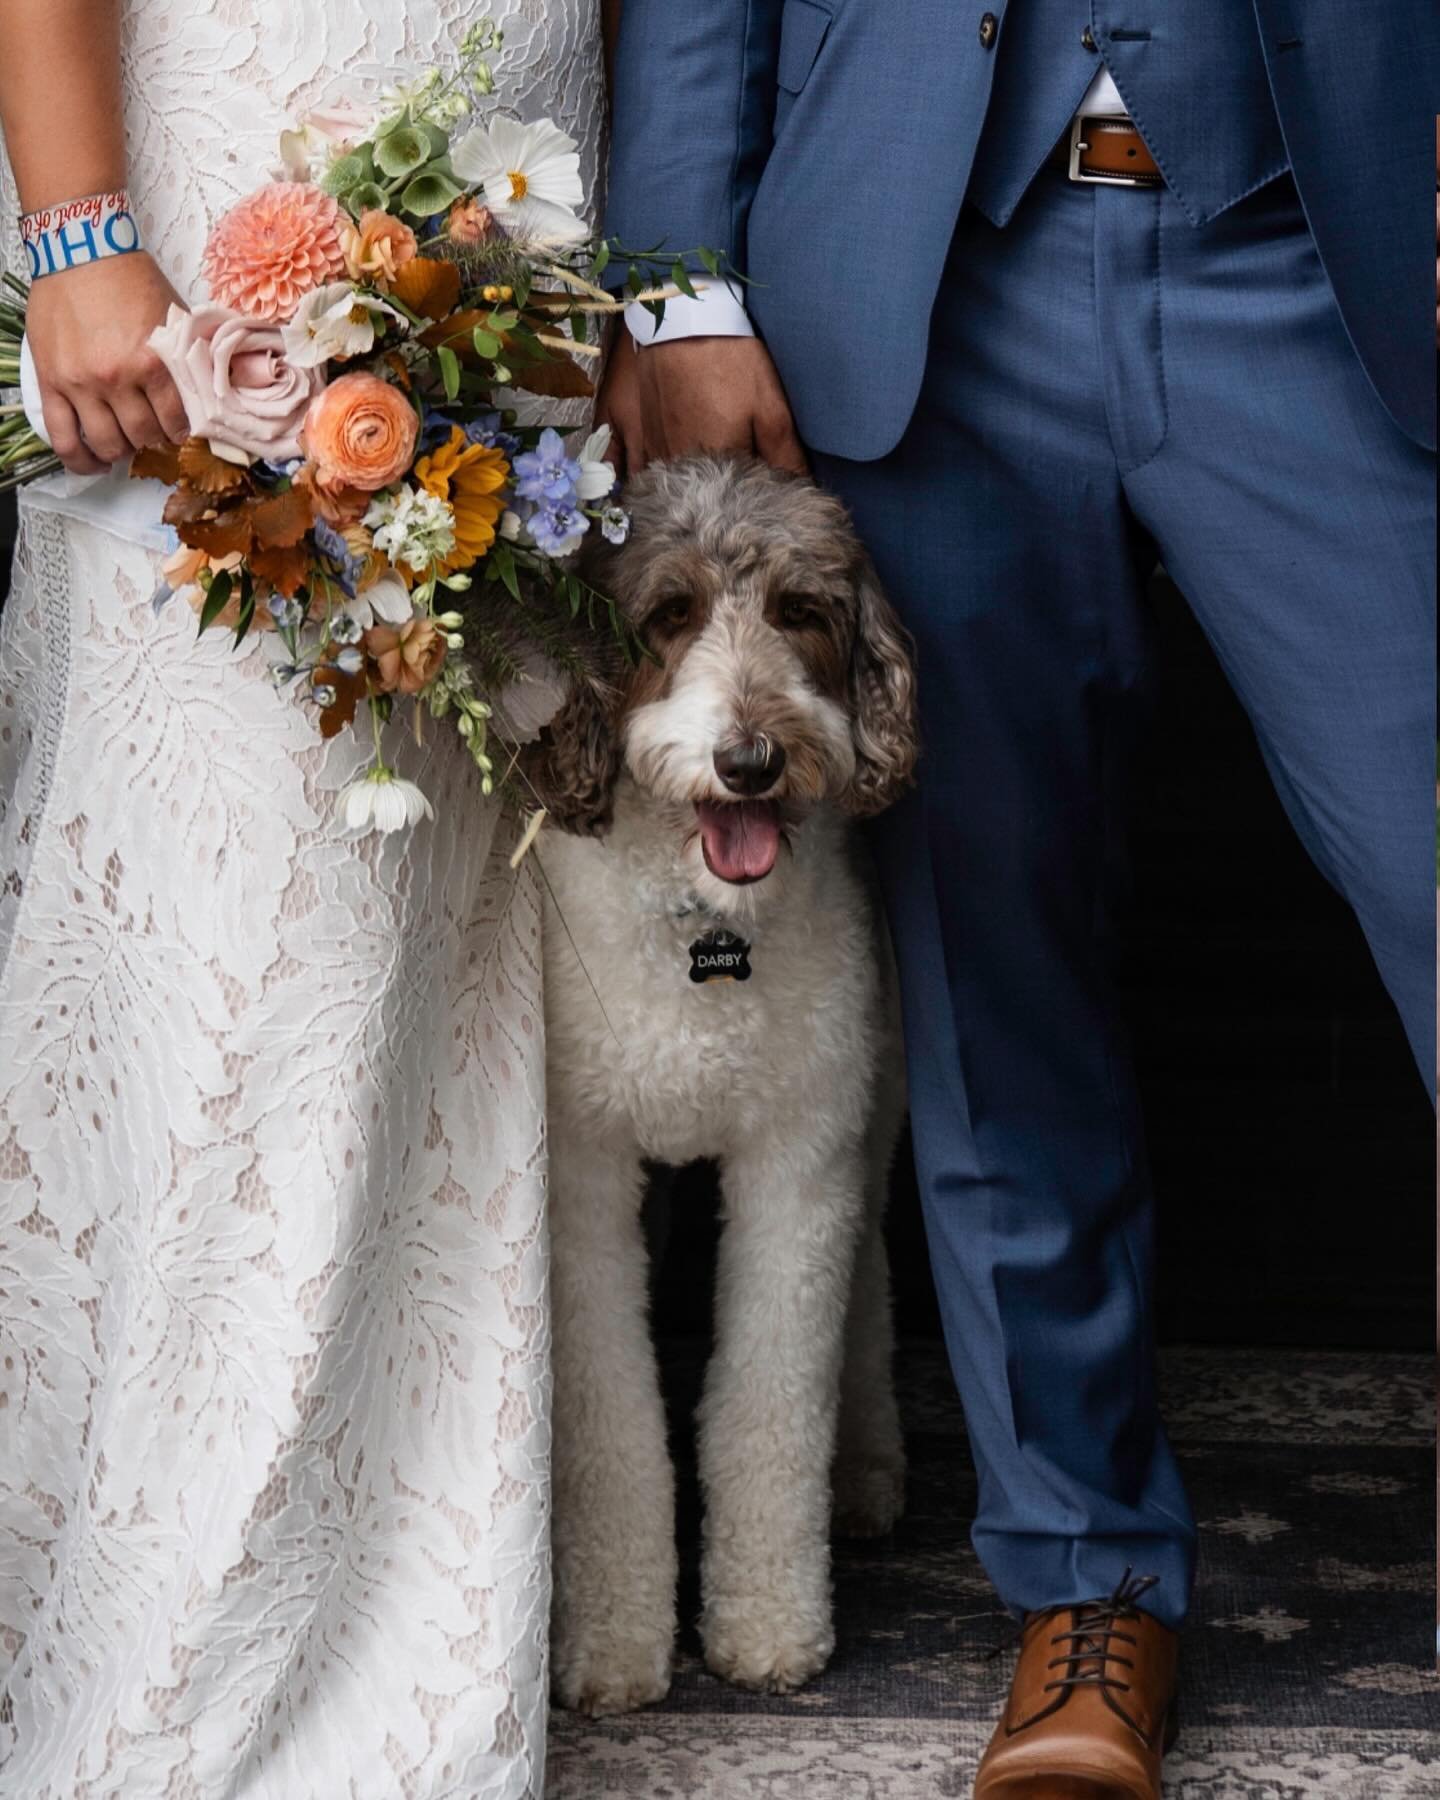 If you are on the fence about bringing your dog to your wedding in Colorado, I&rsquo;ll give you 5 reasons to hop on off and start packing the car right now: 

1. Dogs can sign your marriage license as a legal witness in Colorado 🐾 

2. Colorado mak